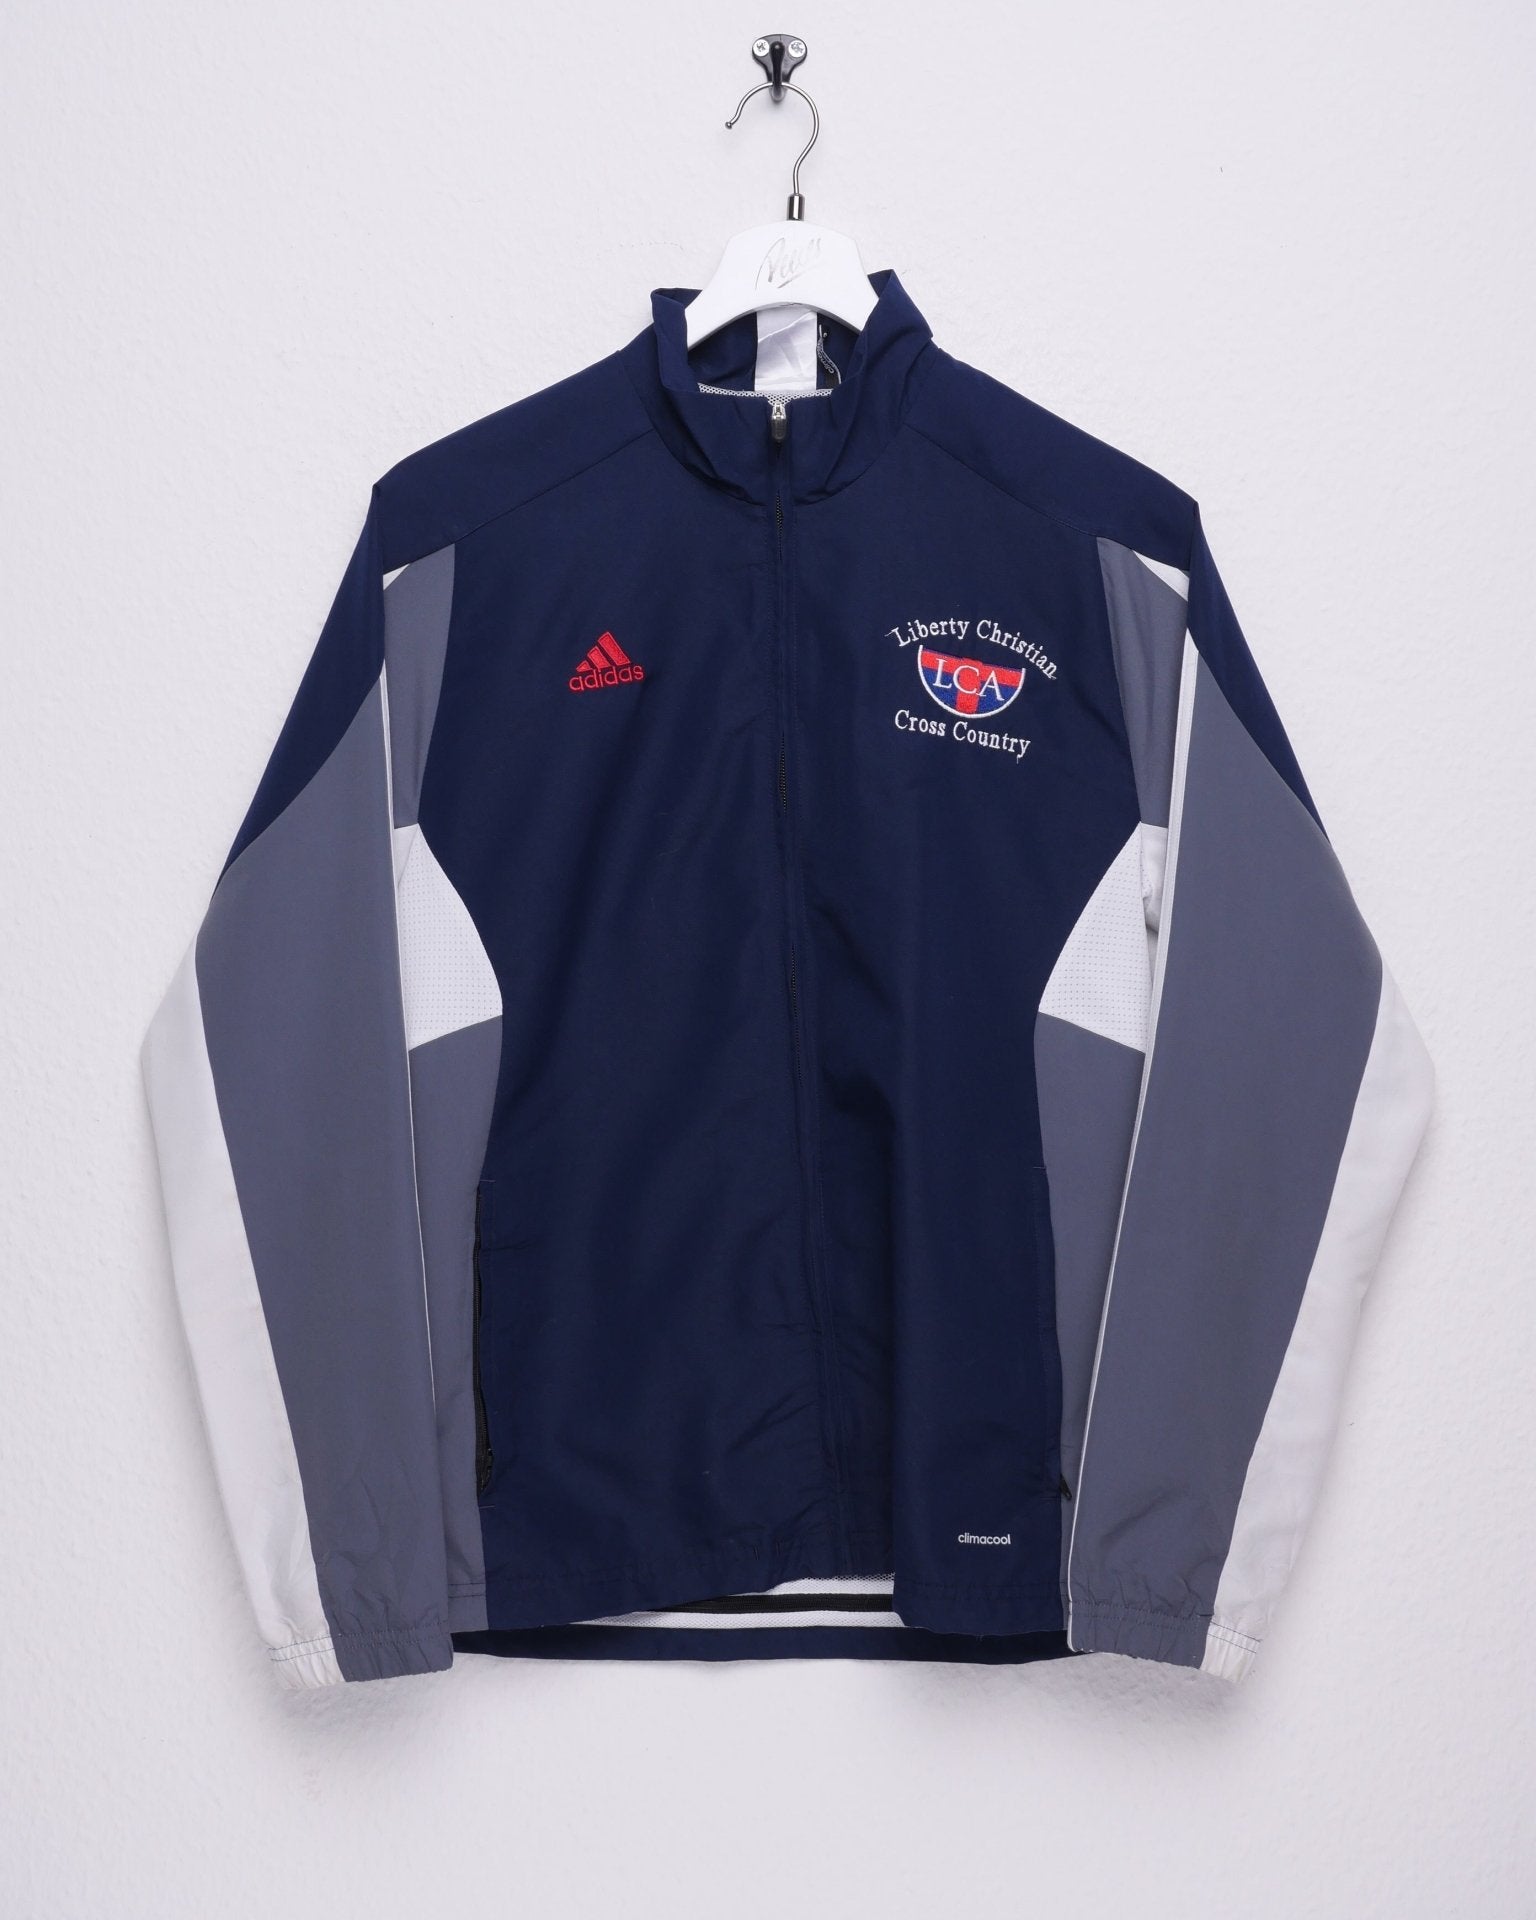 Adidas Cross Country embroidered Logos Track Jacket - Peeces